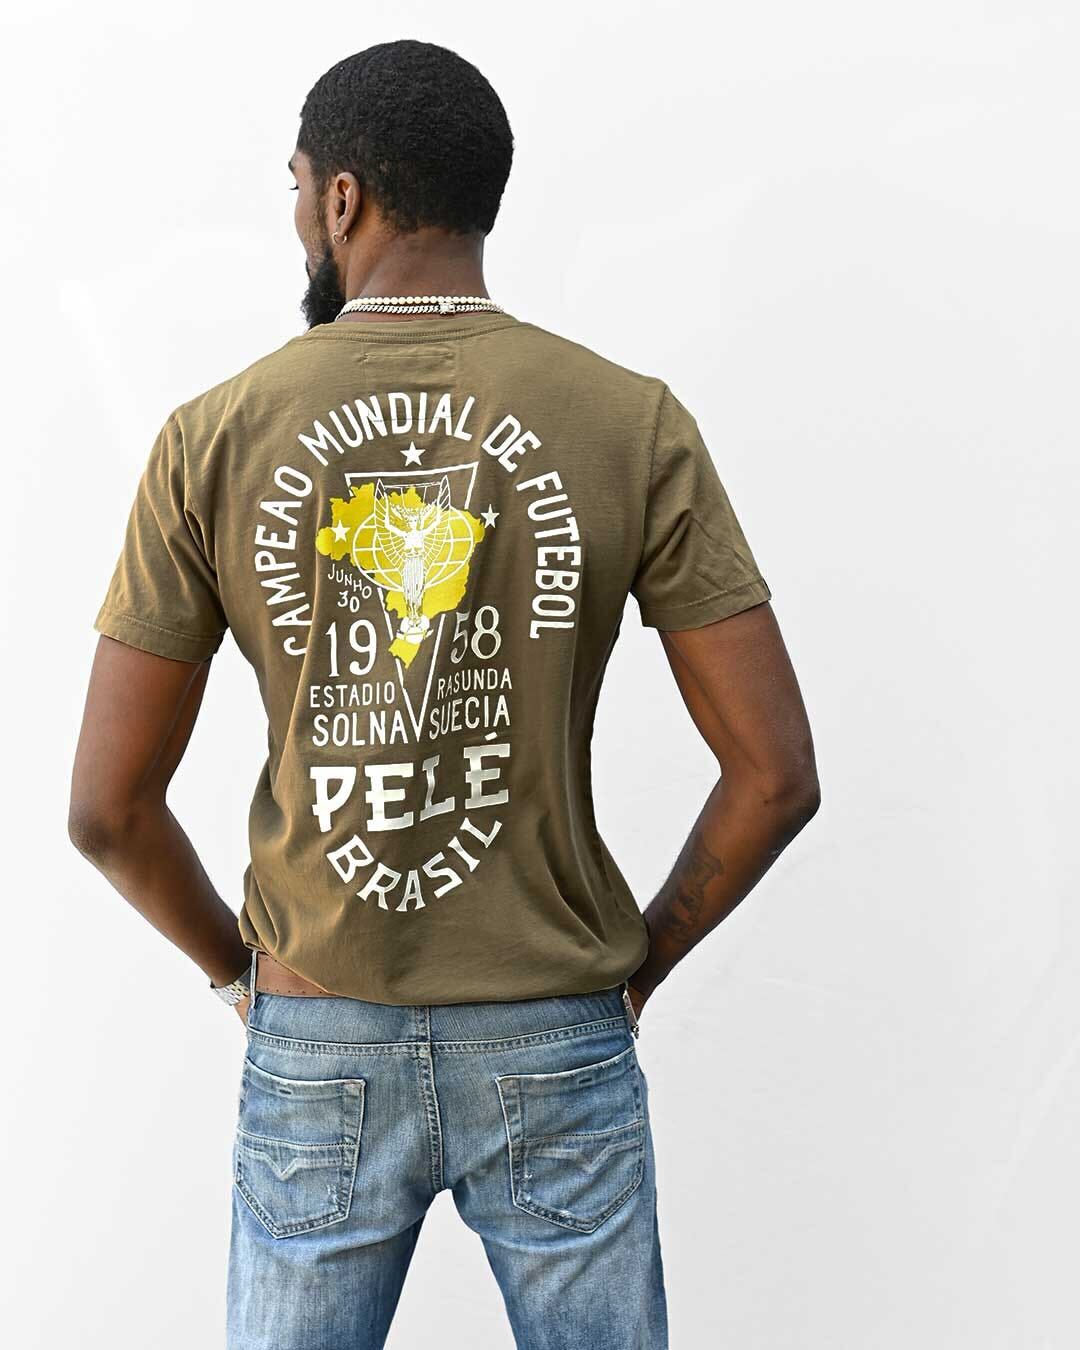 Pelé 1958 Brasil Olive Tee - Roots of Fight Canada